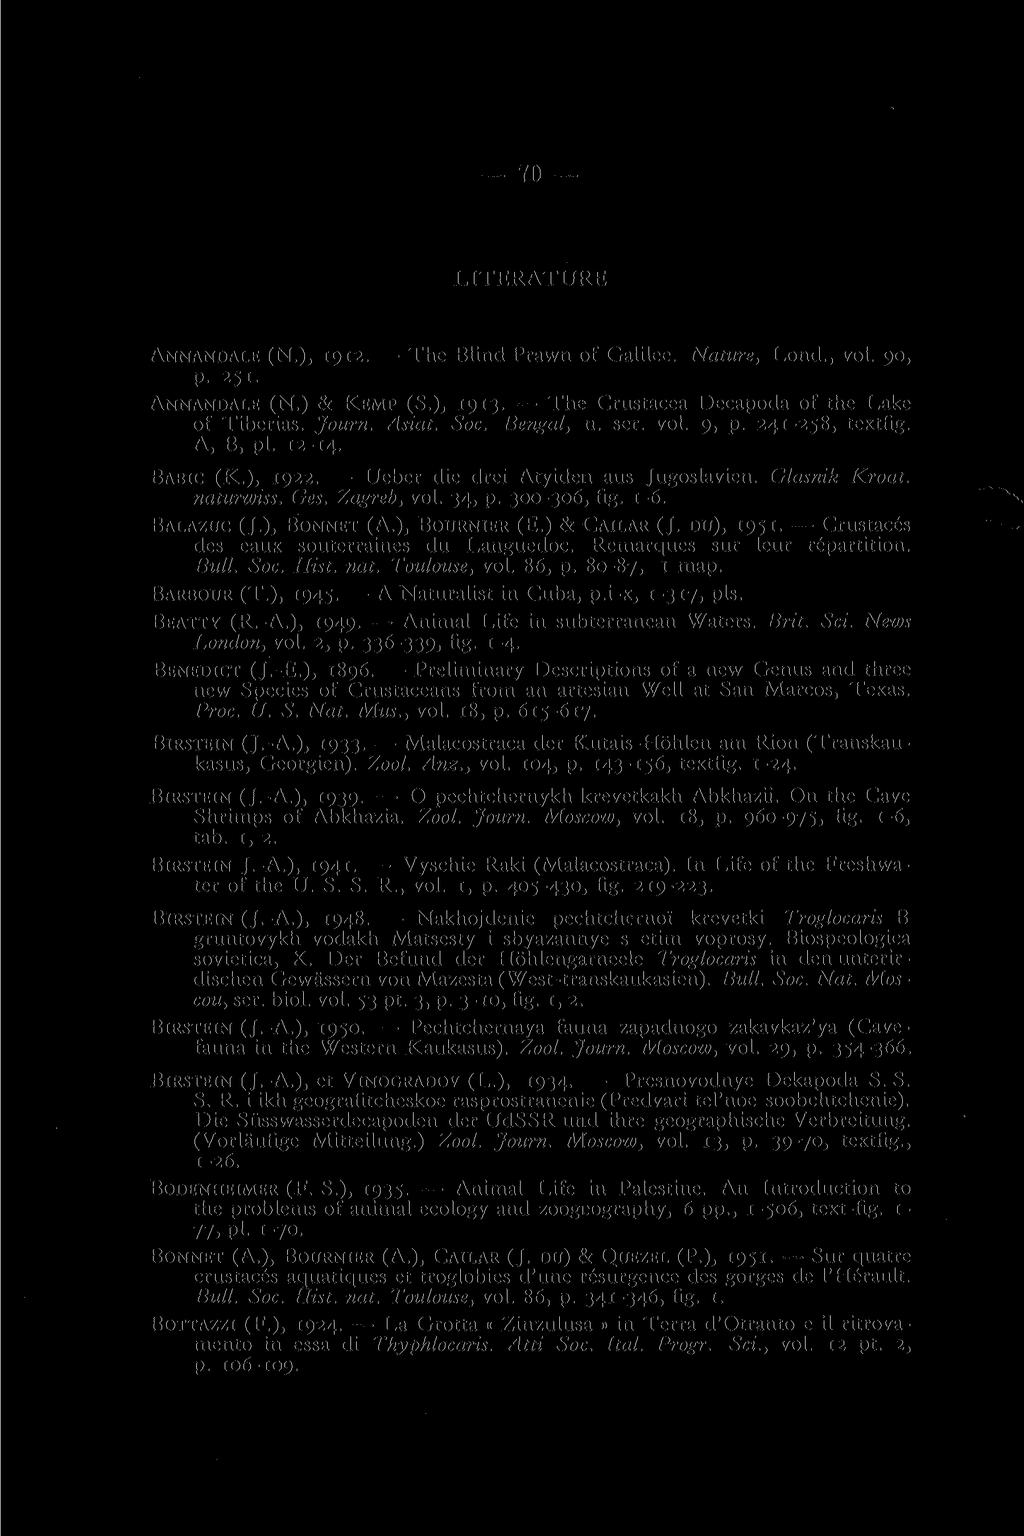 70 LITERATURE ANNANDALE (N.), 1912. The Blind Prawn of Galilee. Nature, Lond., vol. 90, p. 251. ANNANDALE (N.) & KEMP (S.), 1913. The Crustacea Decapoda of the Lake of Tiberias. Journ. Asiat. Soc.